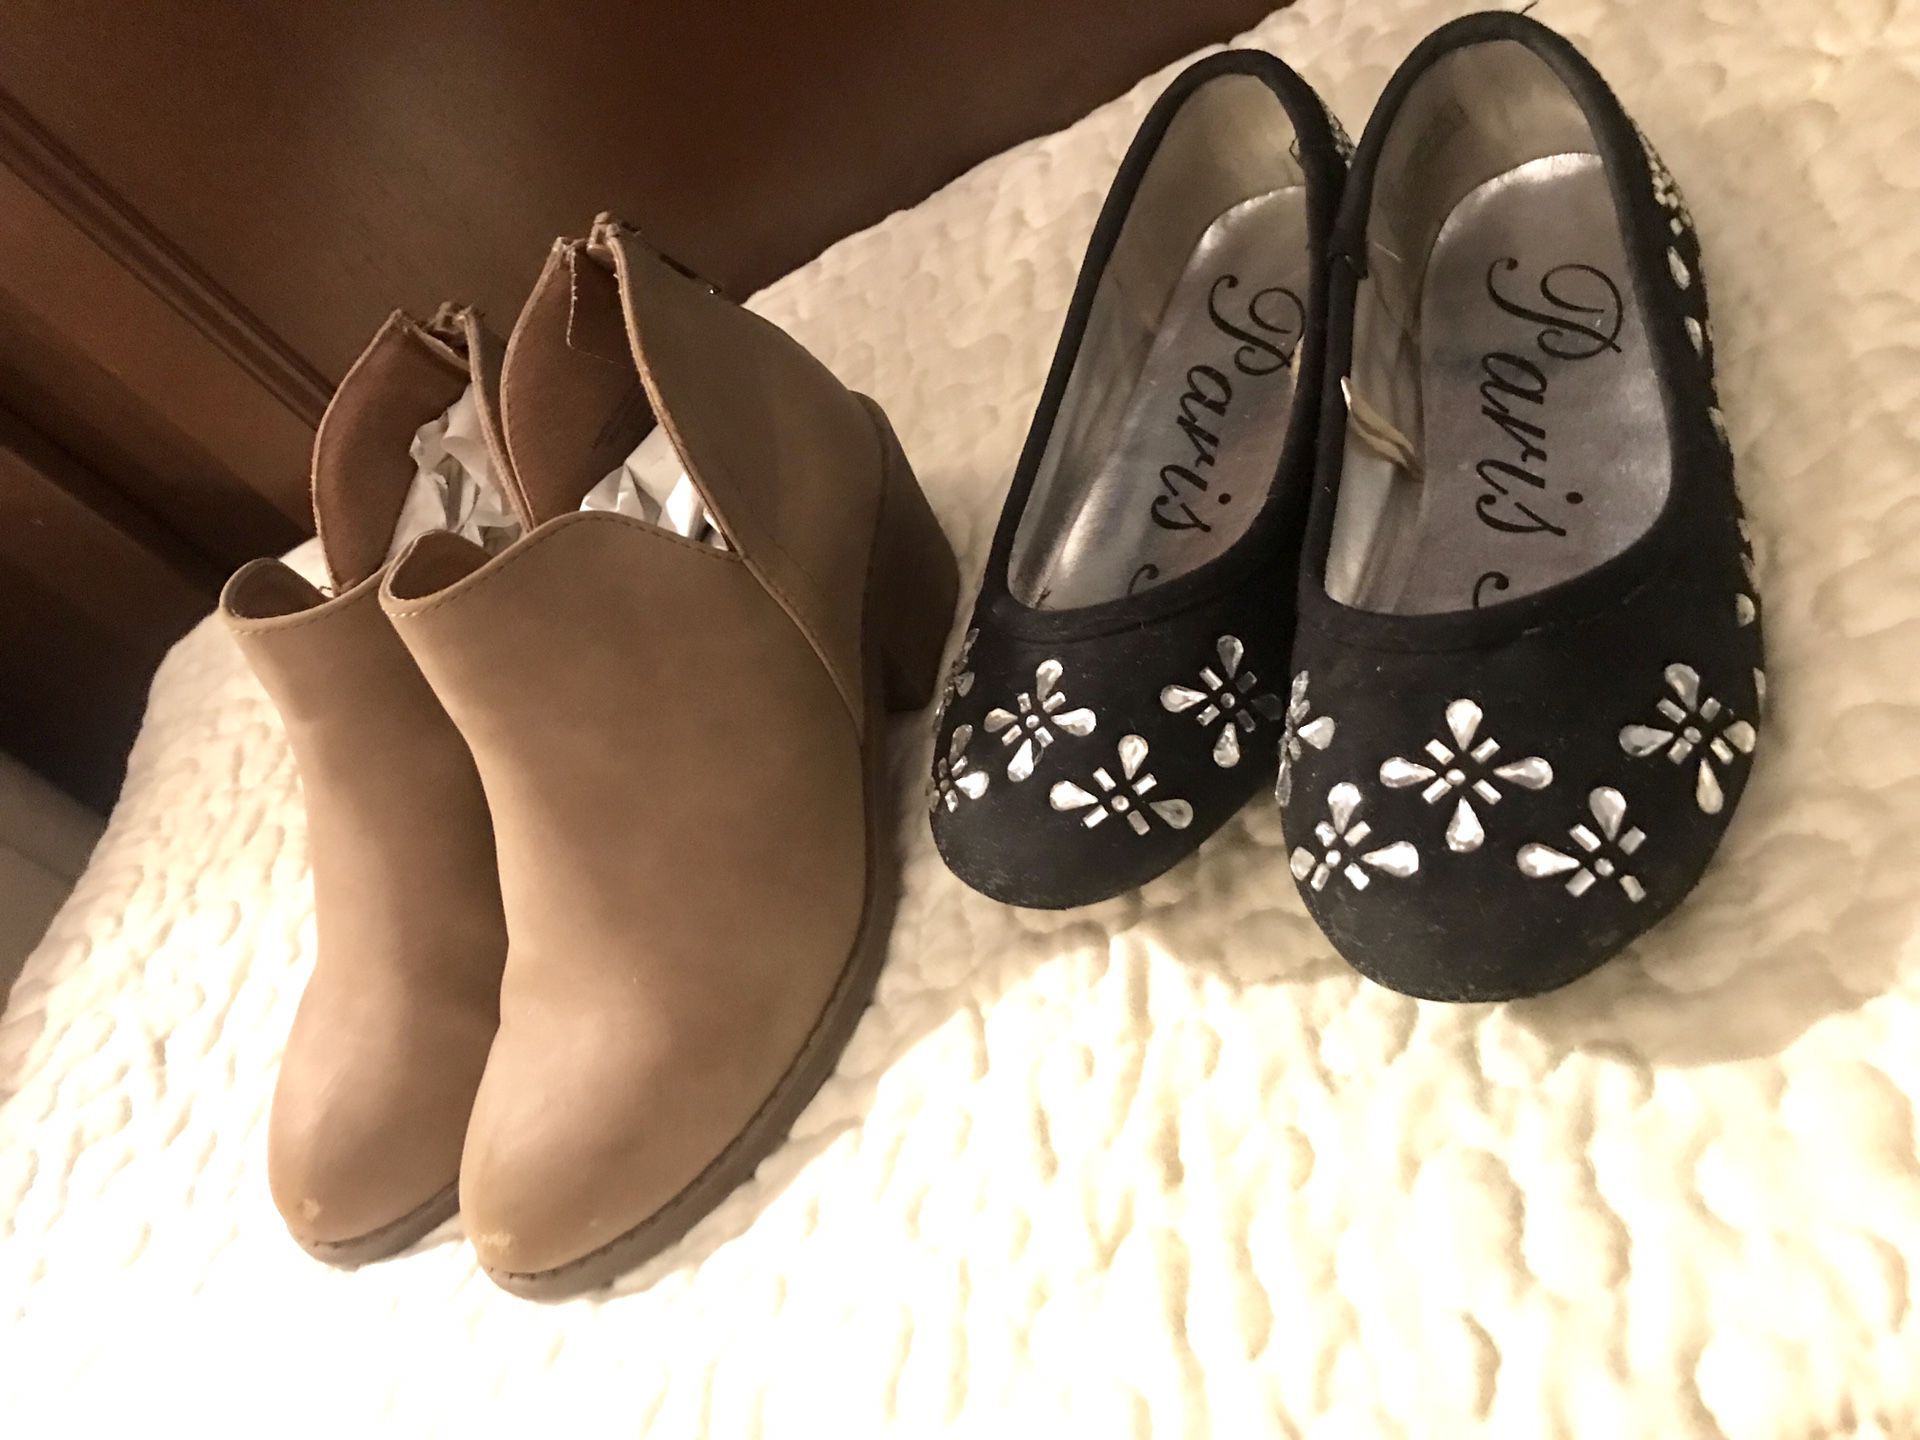 2 PAIRS OF LITTLE GIRLS SIZE 12C SHOES - TAN HEEL ANKLE BOOTS & BLACK FLATS WITH RHINESTONES